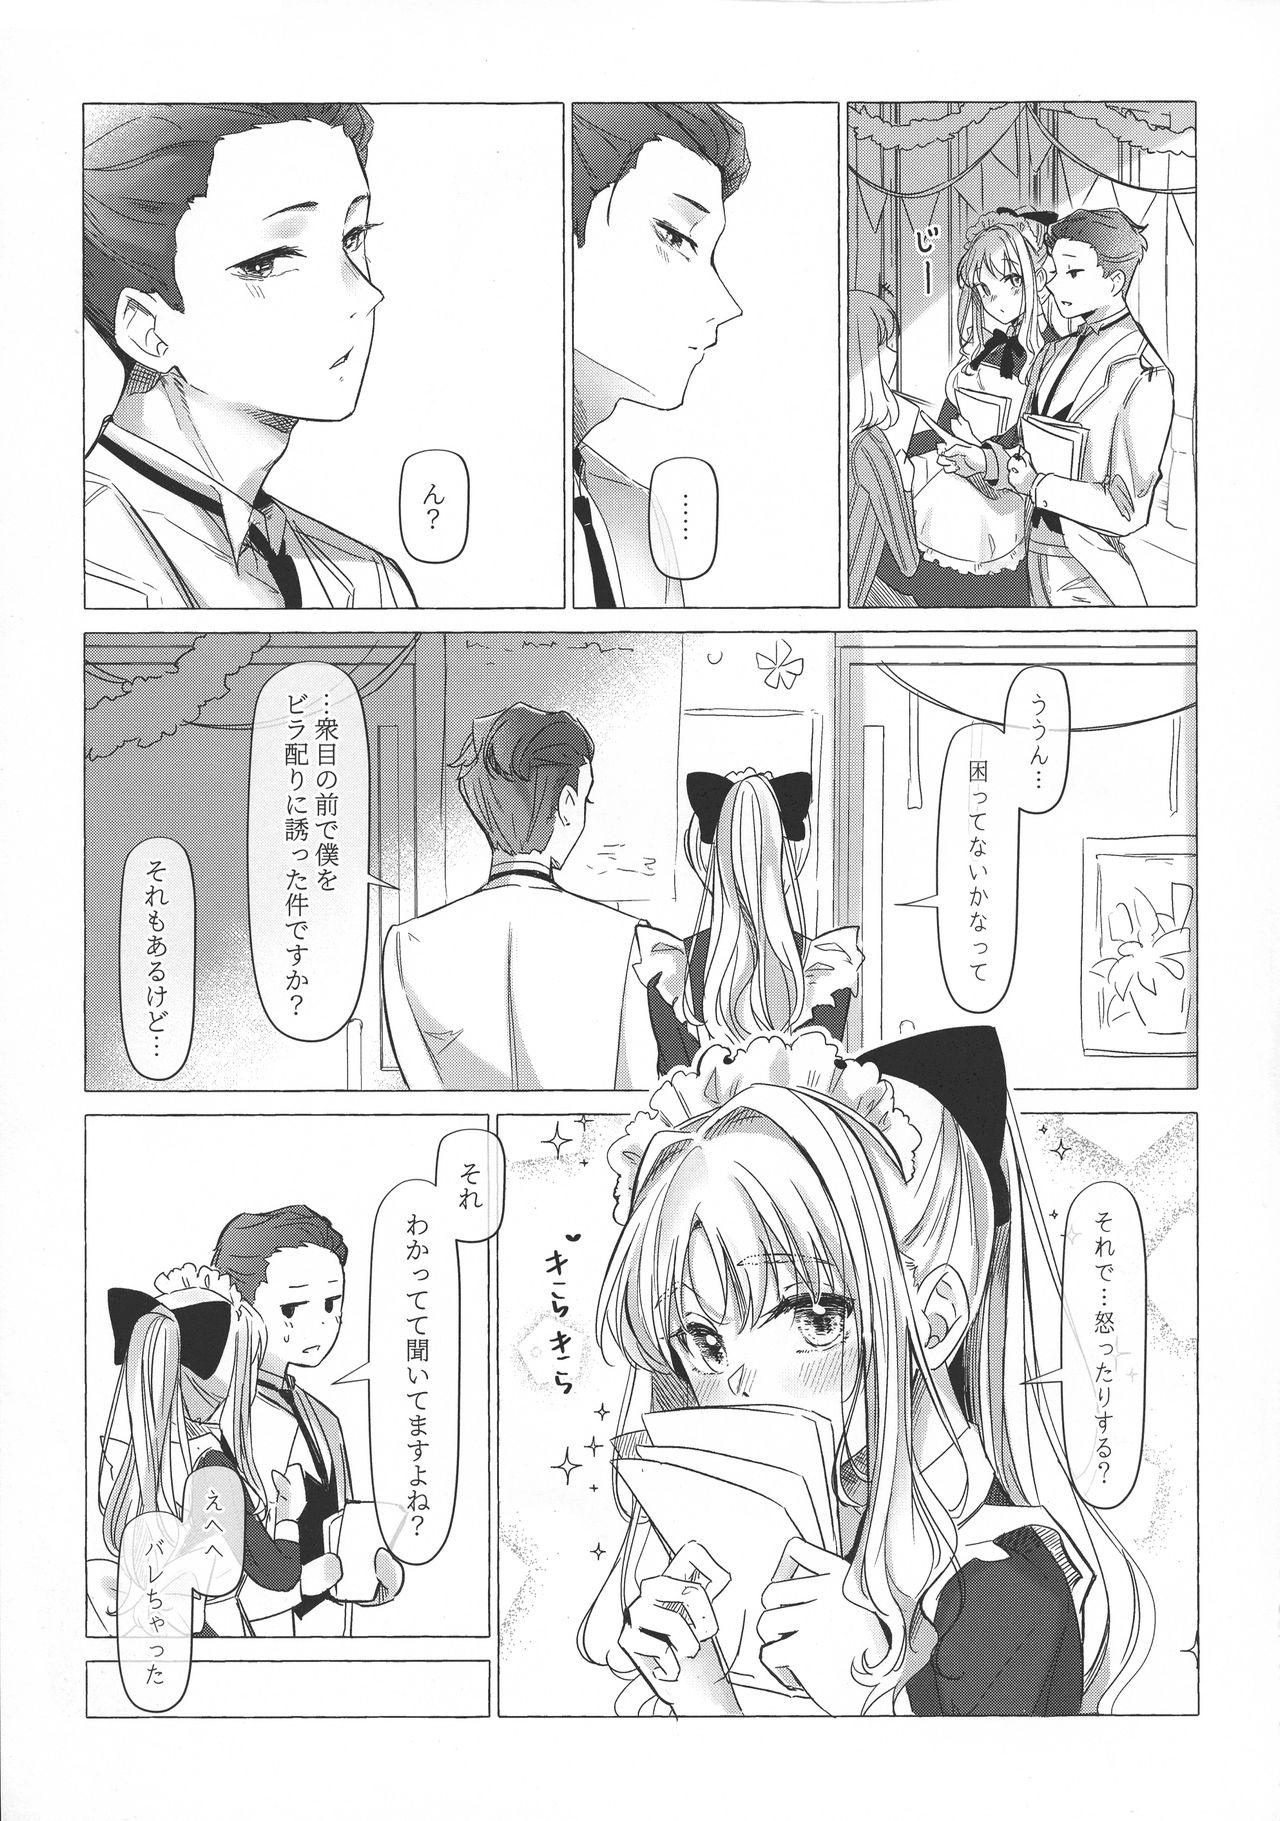 Amateur Blow Job 満心総意の躾 - Darling in the franxx Sex Pussy - Page 6